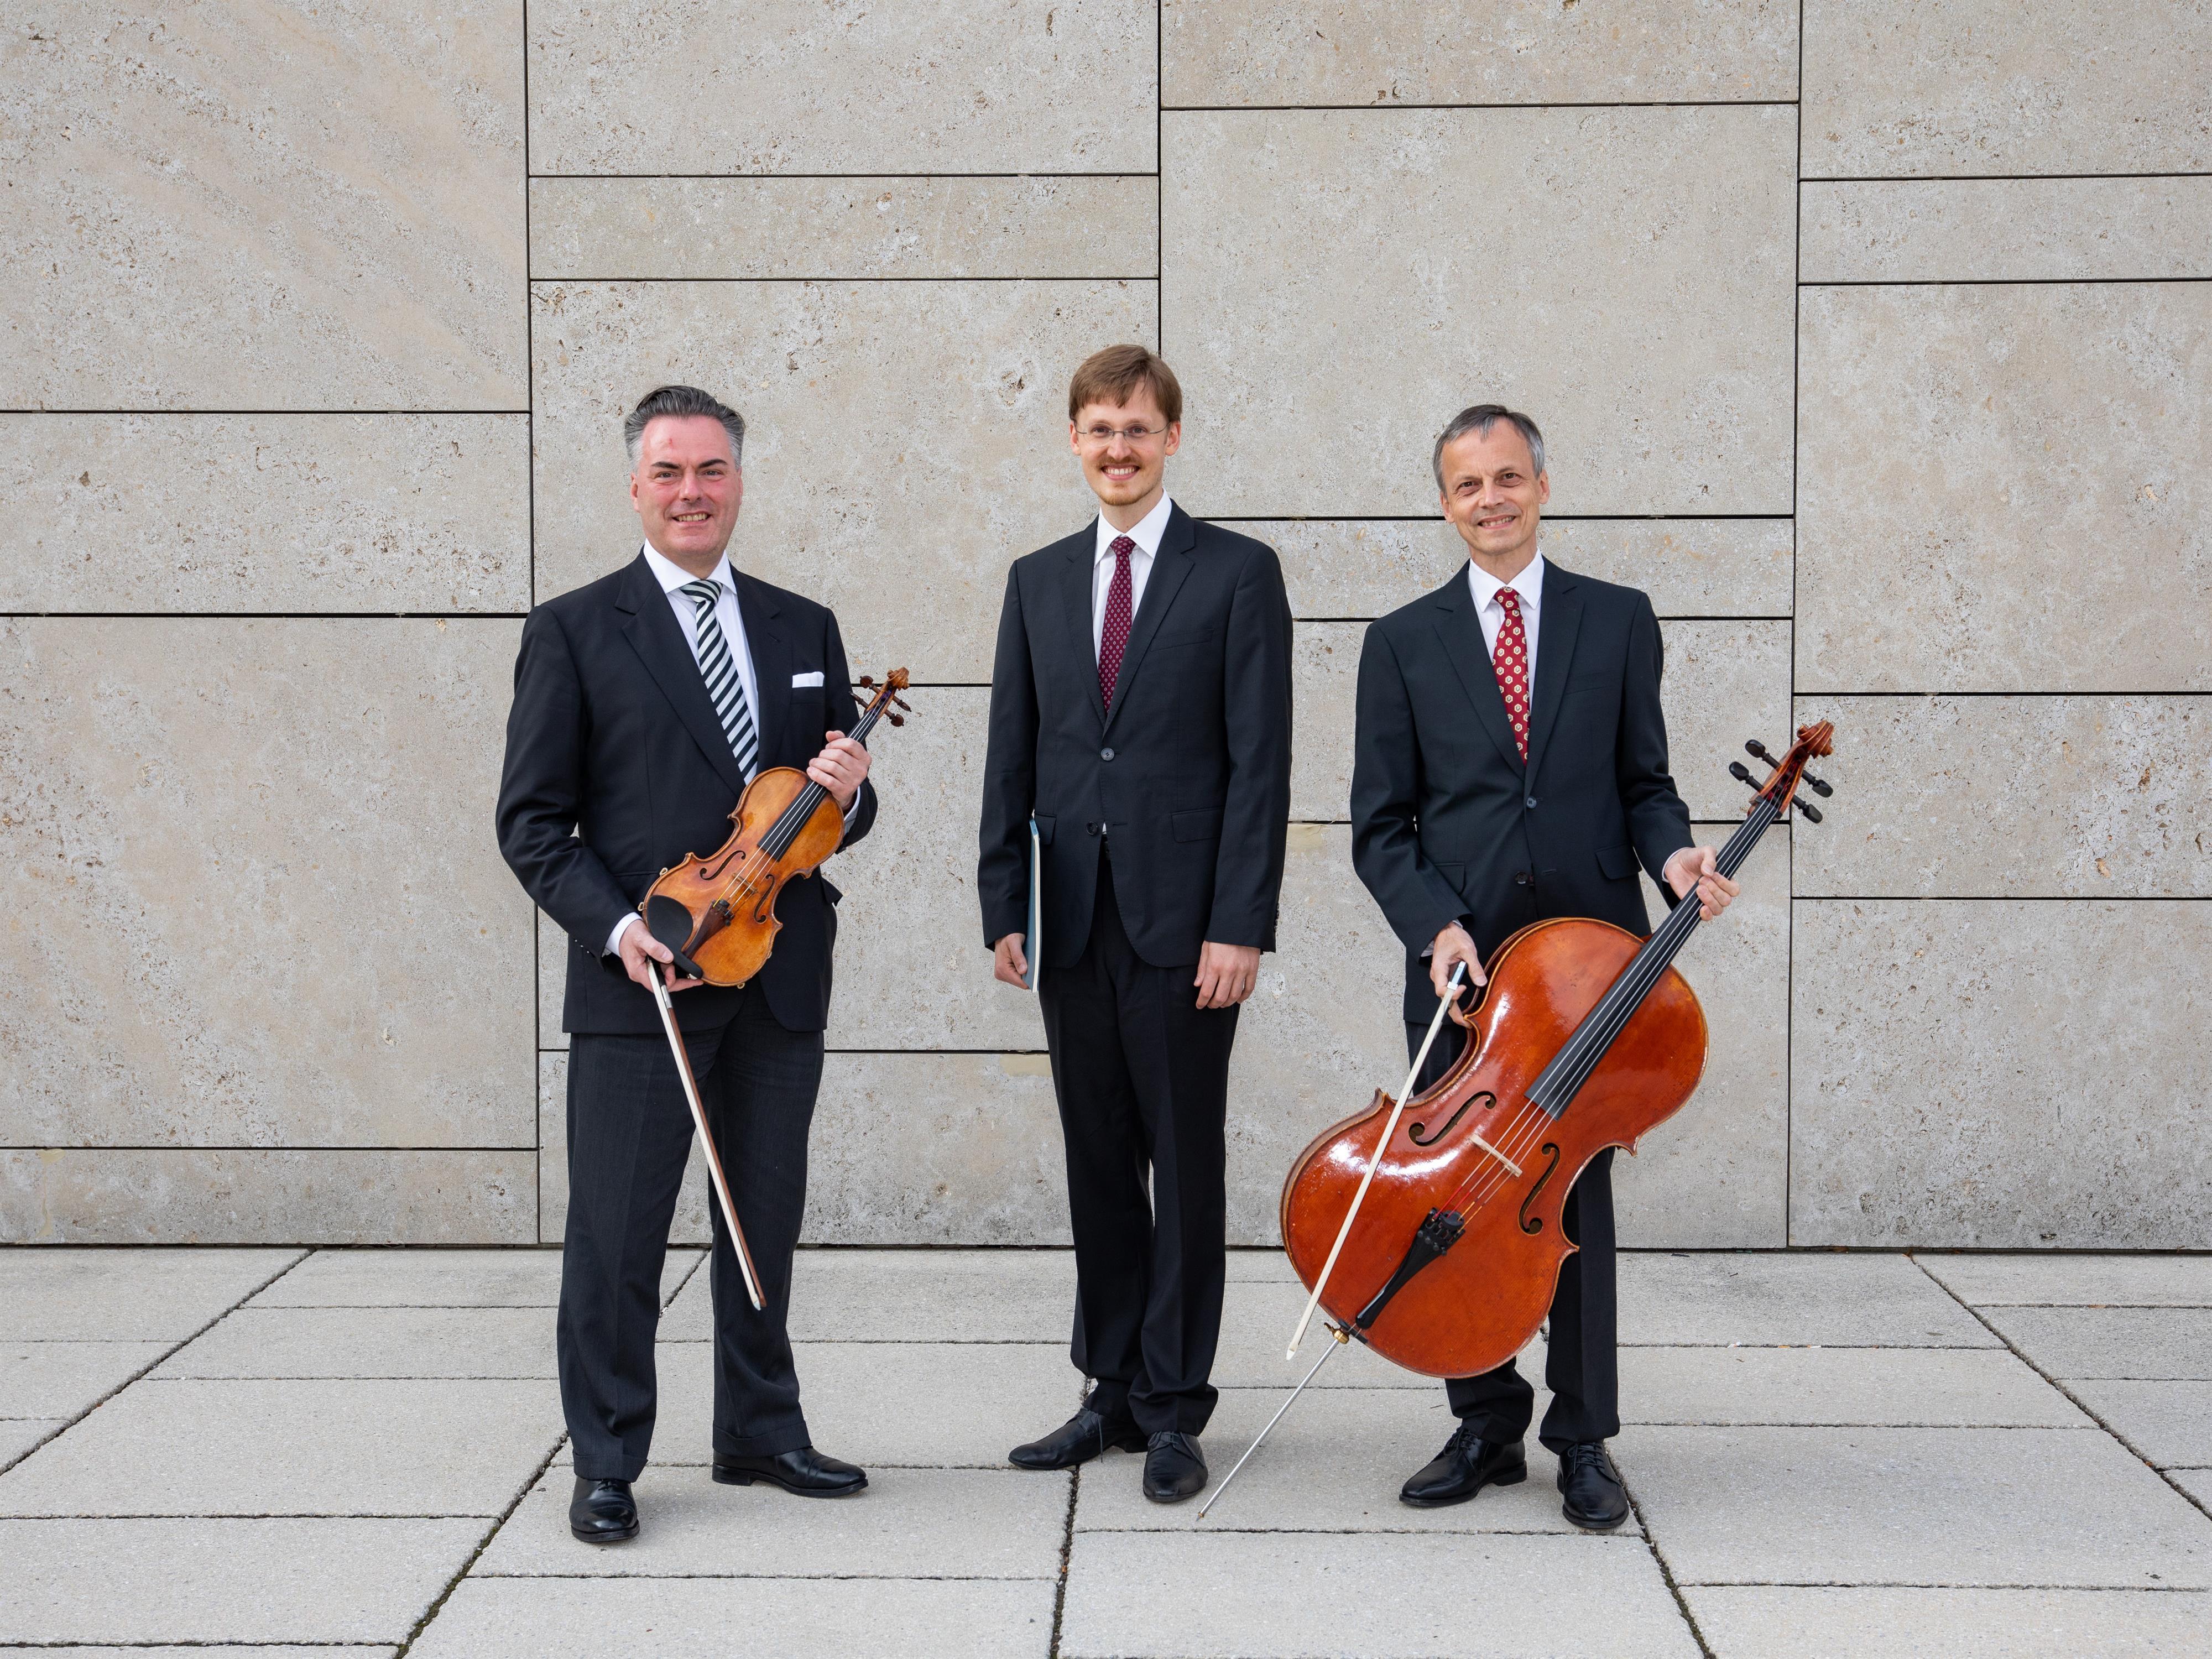 Rotary Charity Concert: The Arista Trio plays Ravel and Tschaikowsky